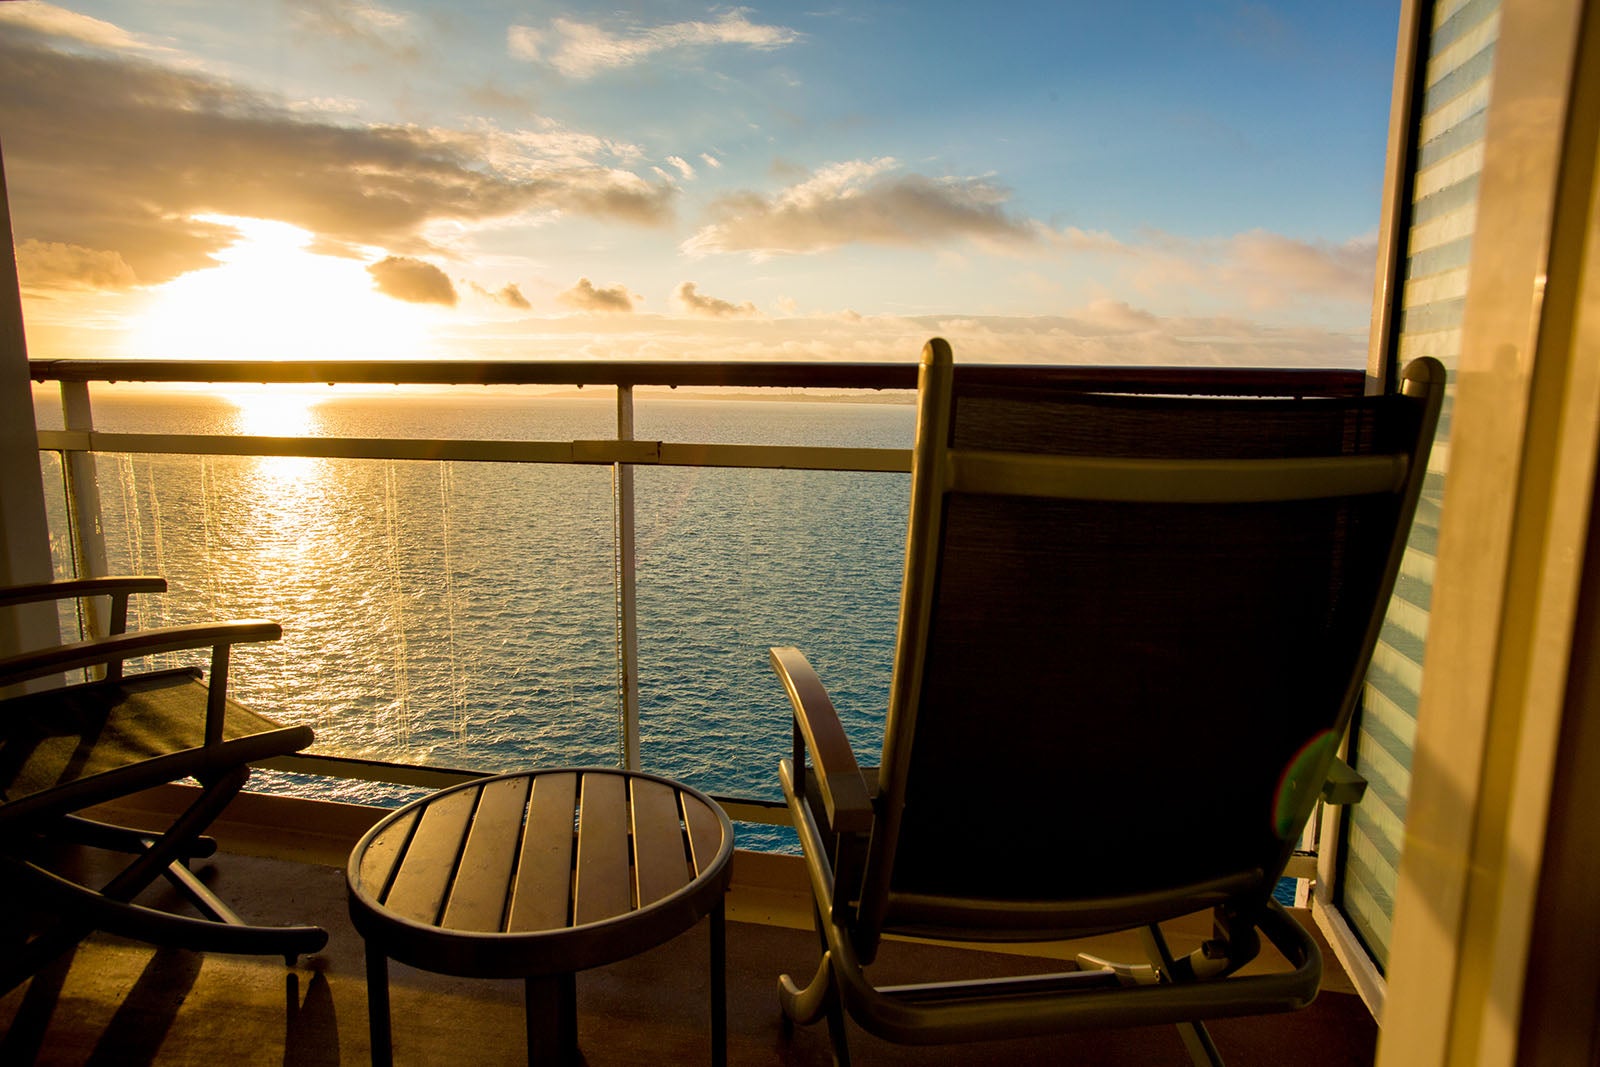 Calm scene of a deck chair at dusk viewing a beautiful sunset from a cruise ship